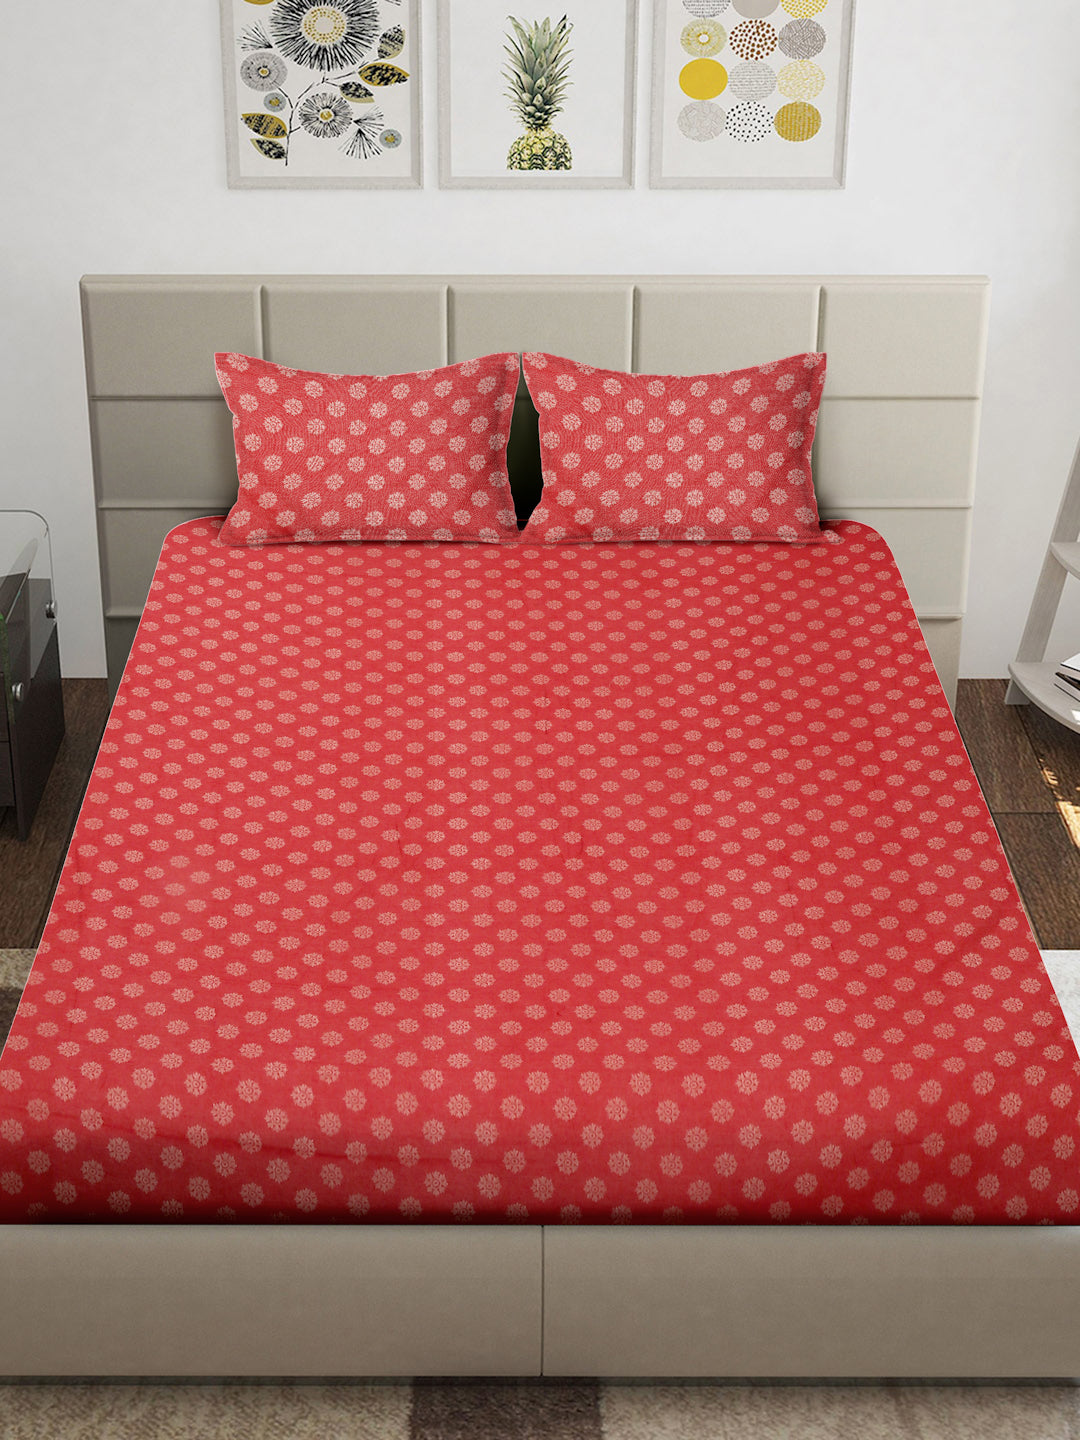 Arrabi Red Floral 100% Handwoven Cotton Super King Size Bedsheet with 2 Pillow Covers (270 x 260 cm)